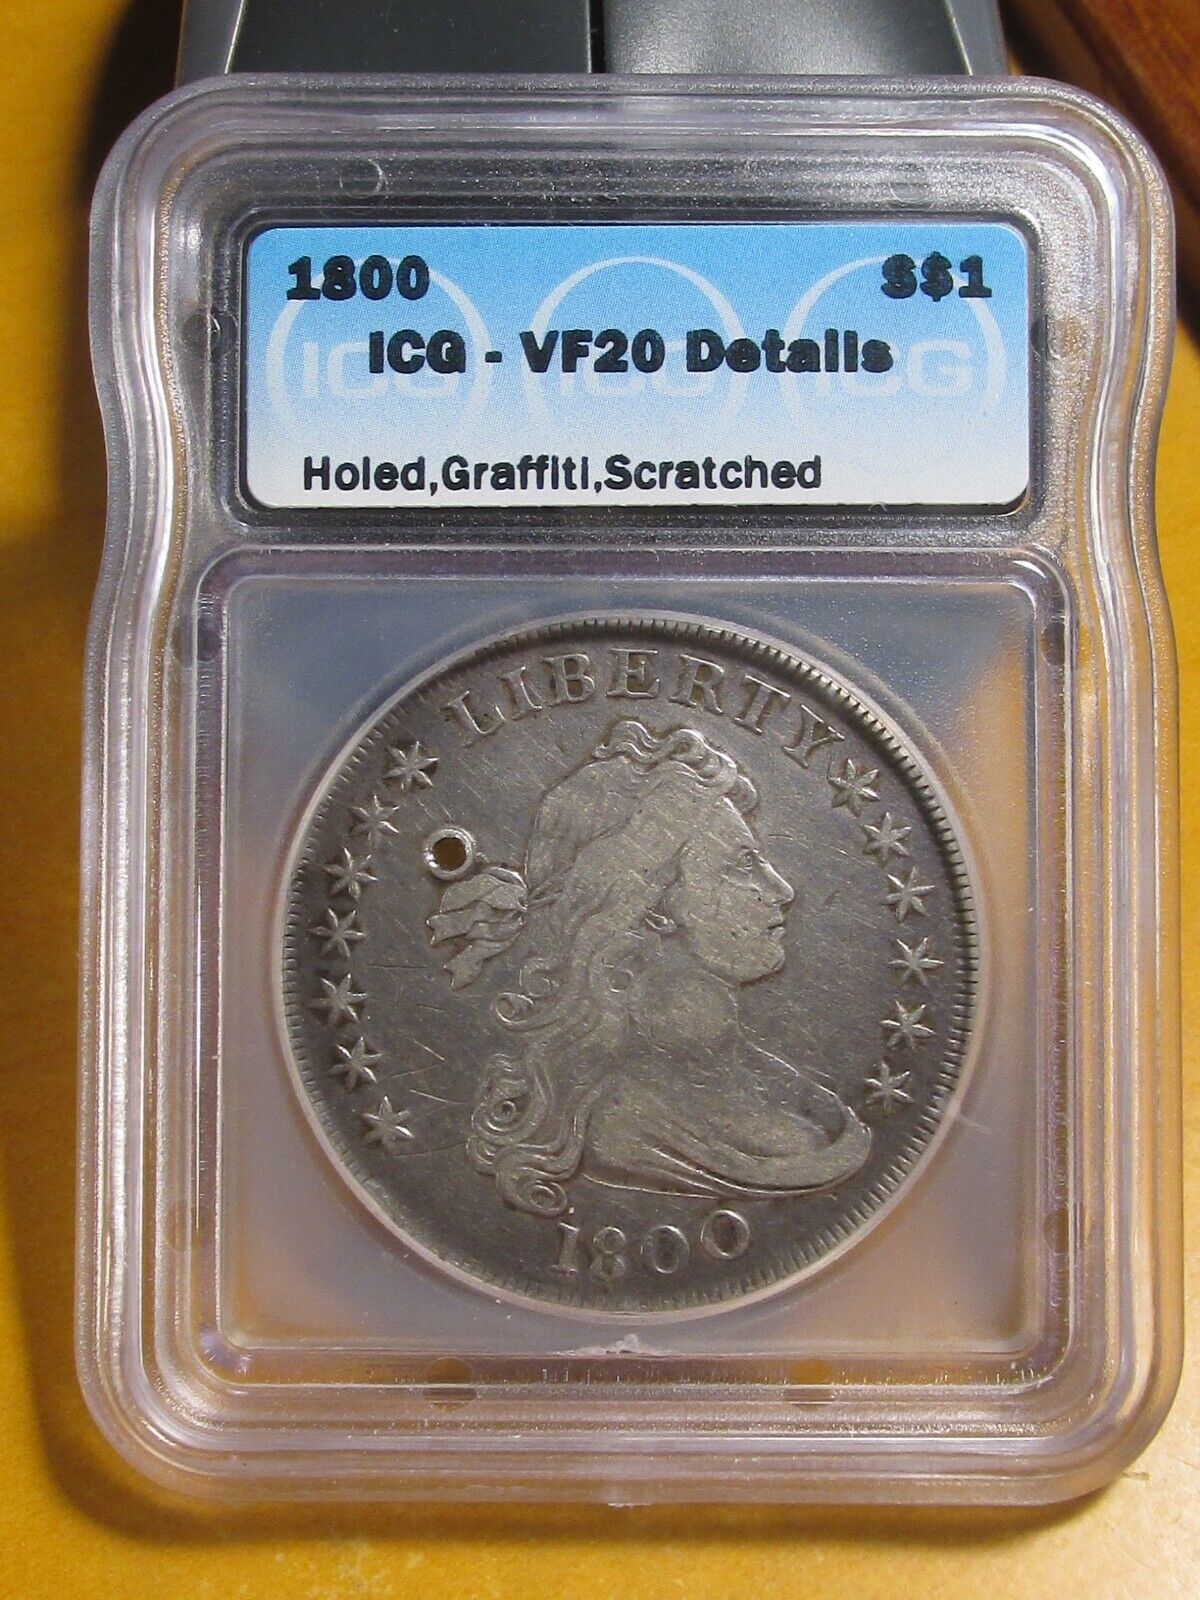 1800 Draped Bust Silver Dollar $1. Icg Vf-20 Details Holed, Graffiti, Scratched.